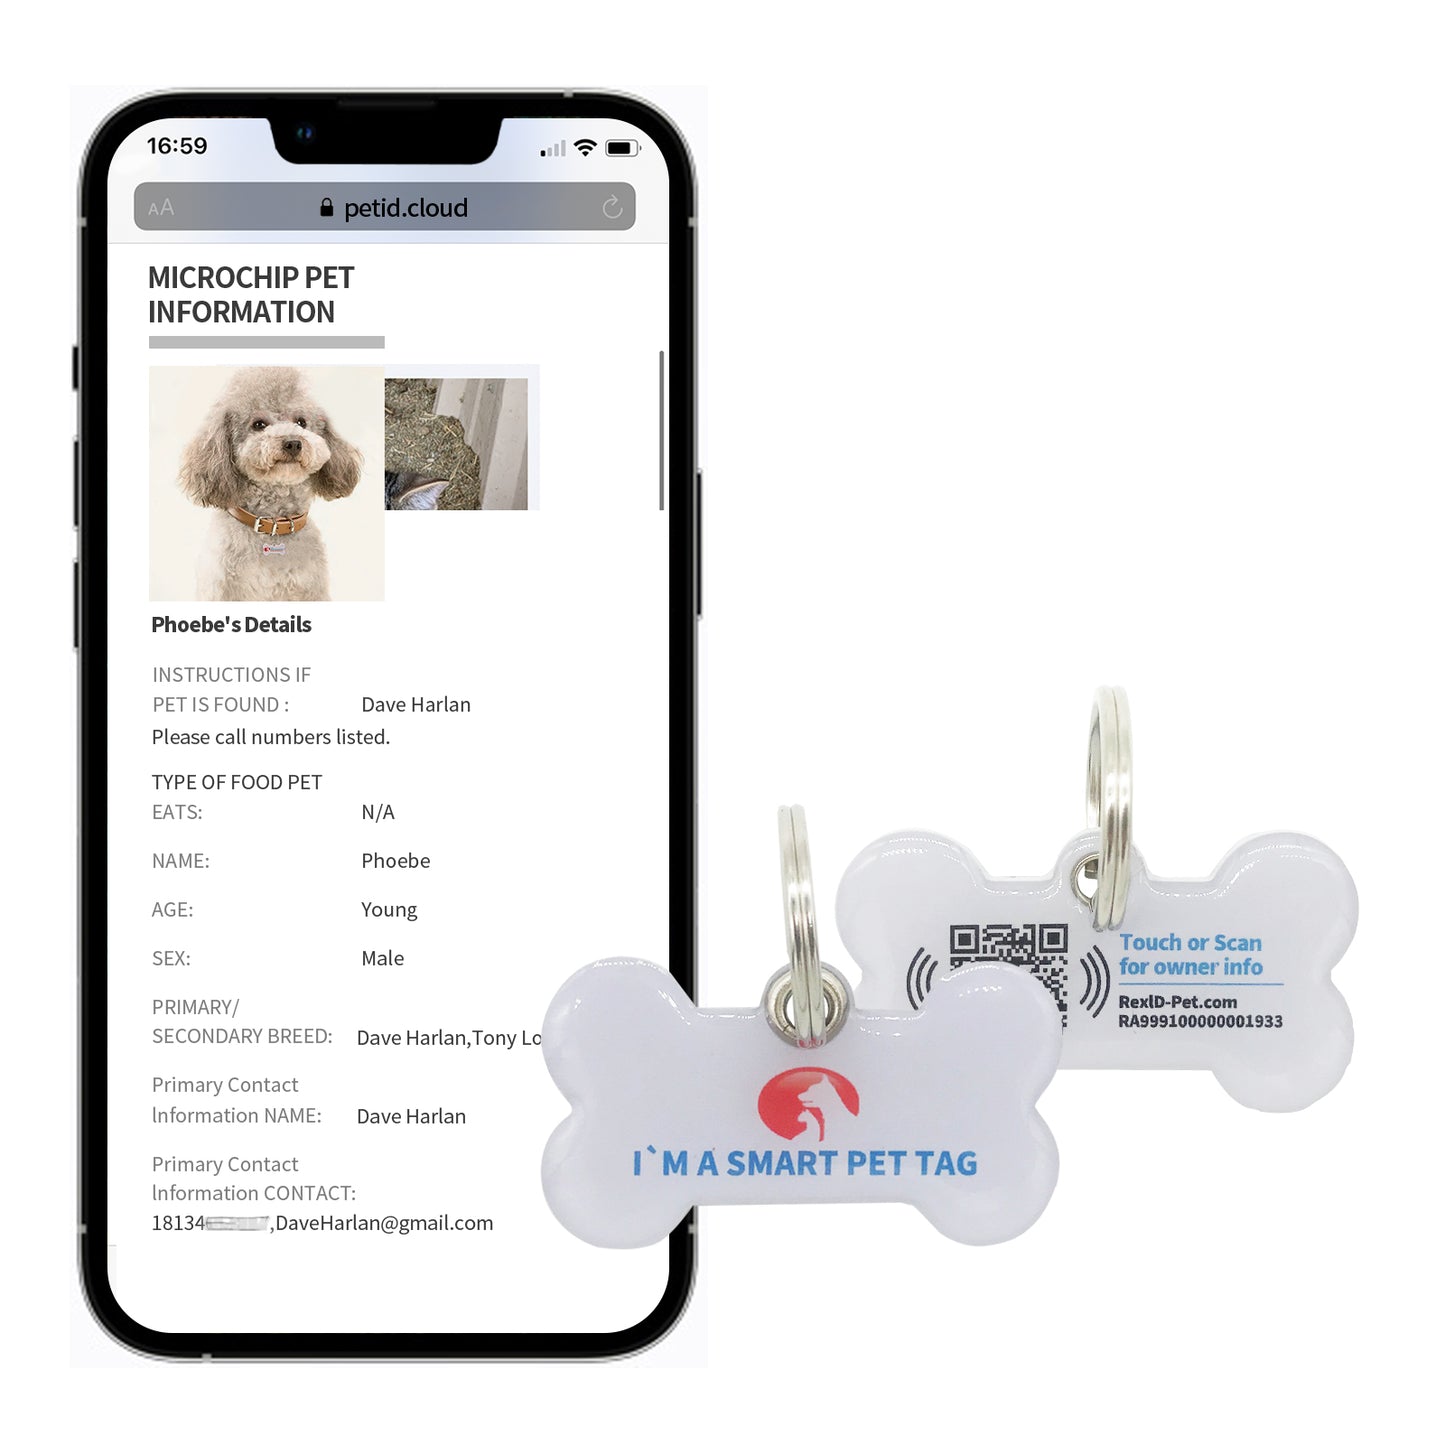 RexID Dog Tag QR Code Pet ID Tags with Pet Online Profile and Owner Contact,Smart Permanent ID Tag for Connecting Pet Owner Immediately by Anybody Anywhere with Mobile Phone